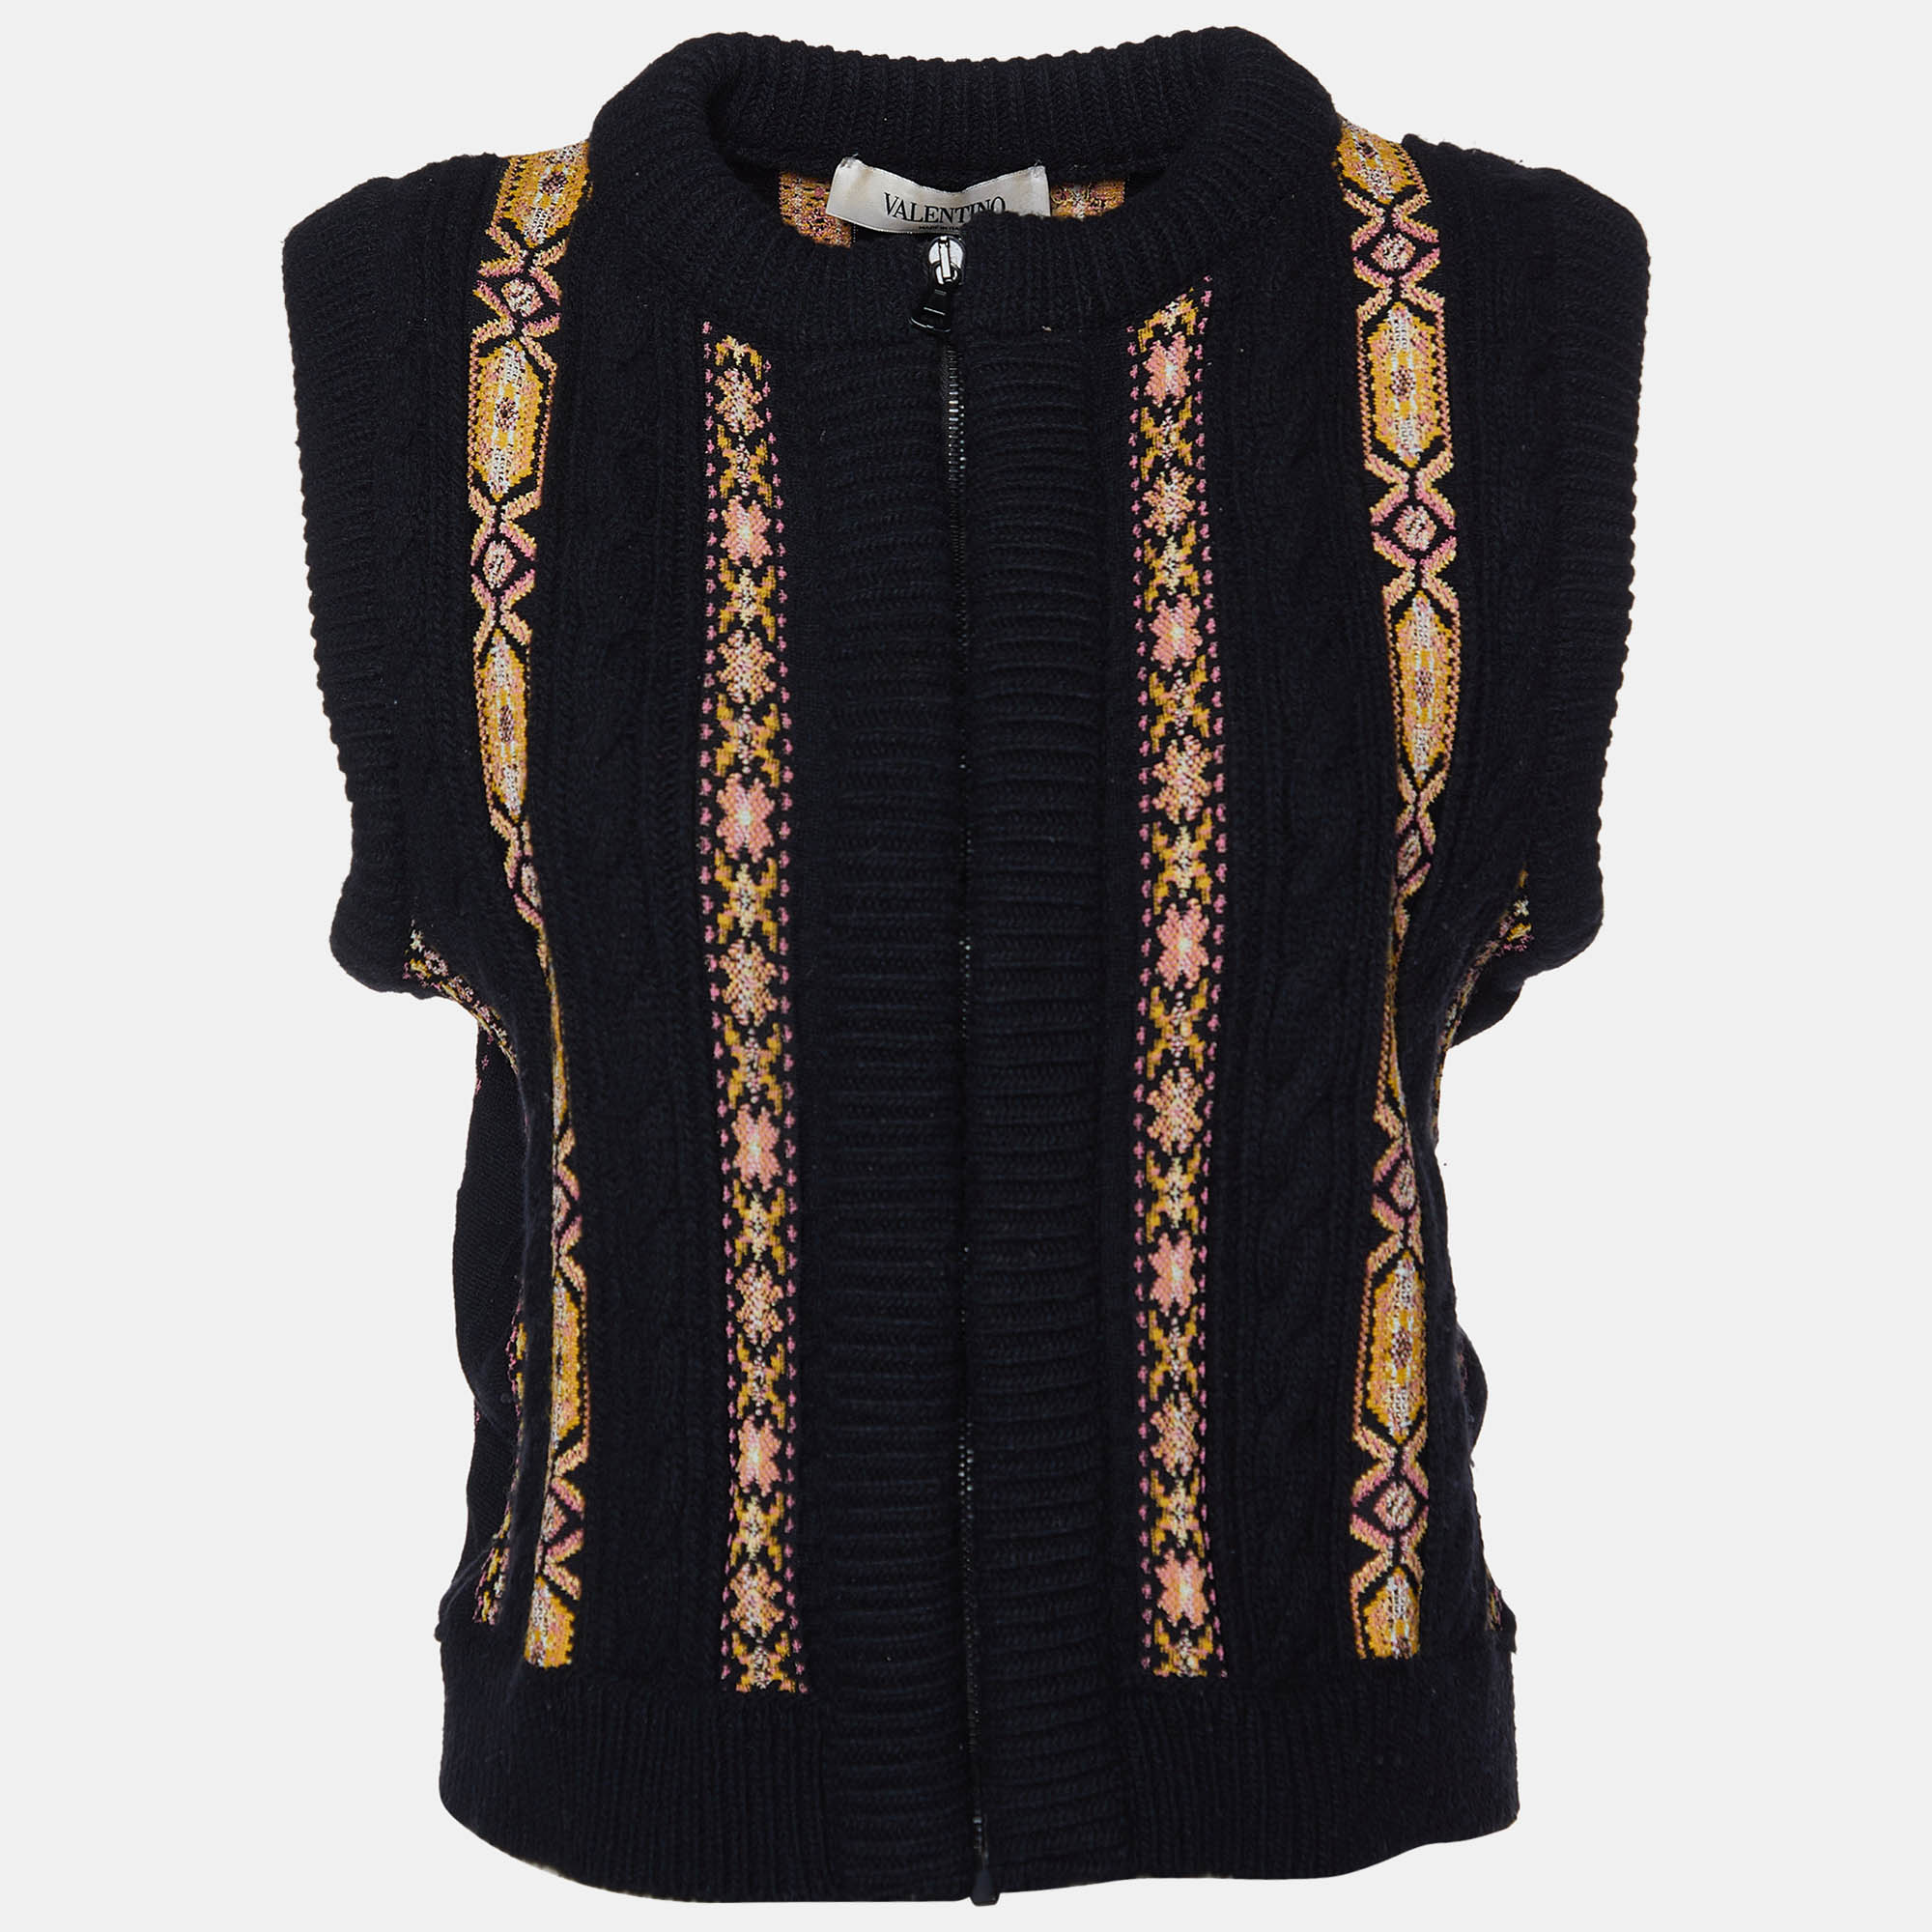 

Valentino Black Patterned Fleece Wool and Cashmere Zip Front Vest M